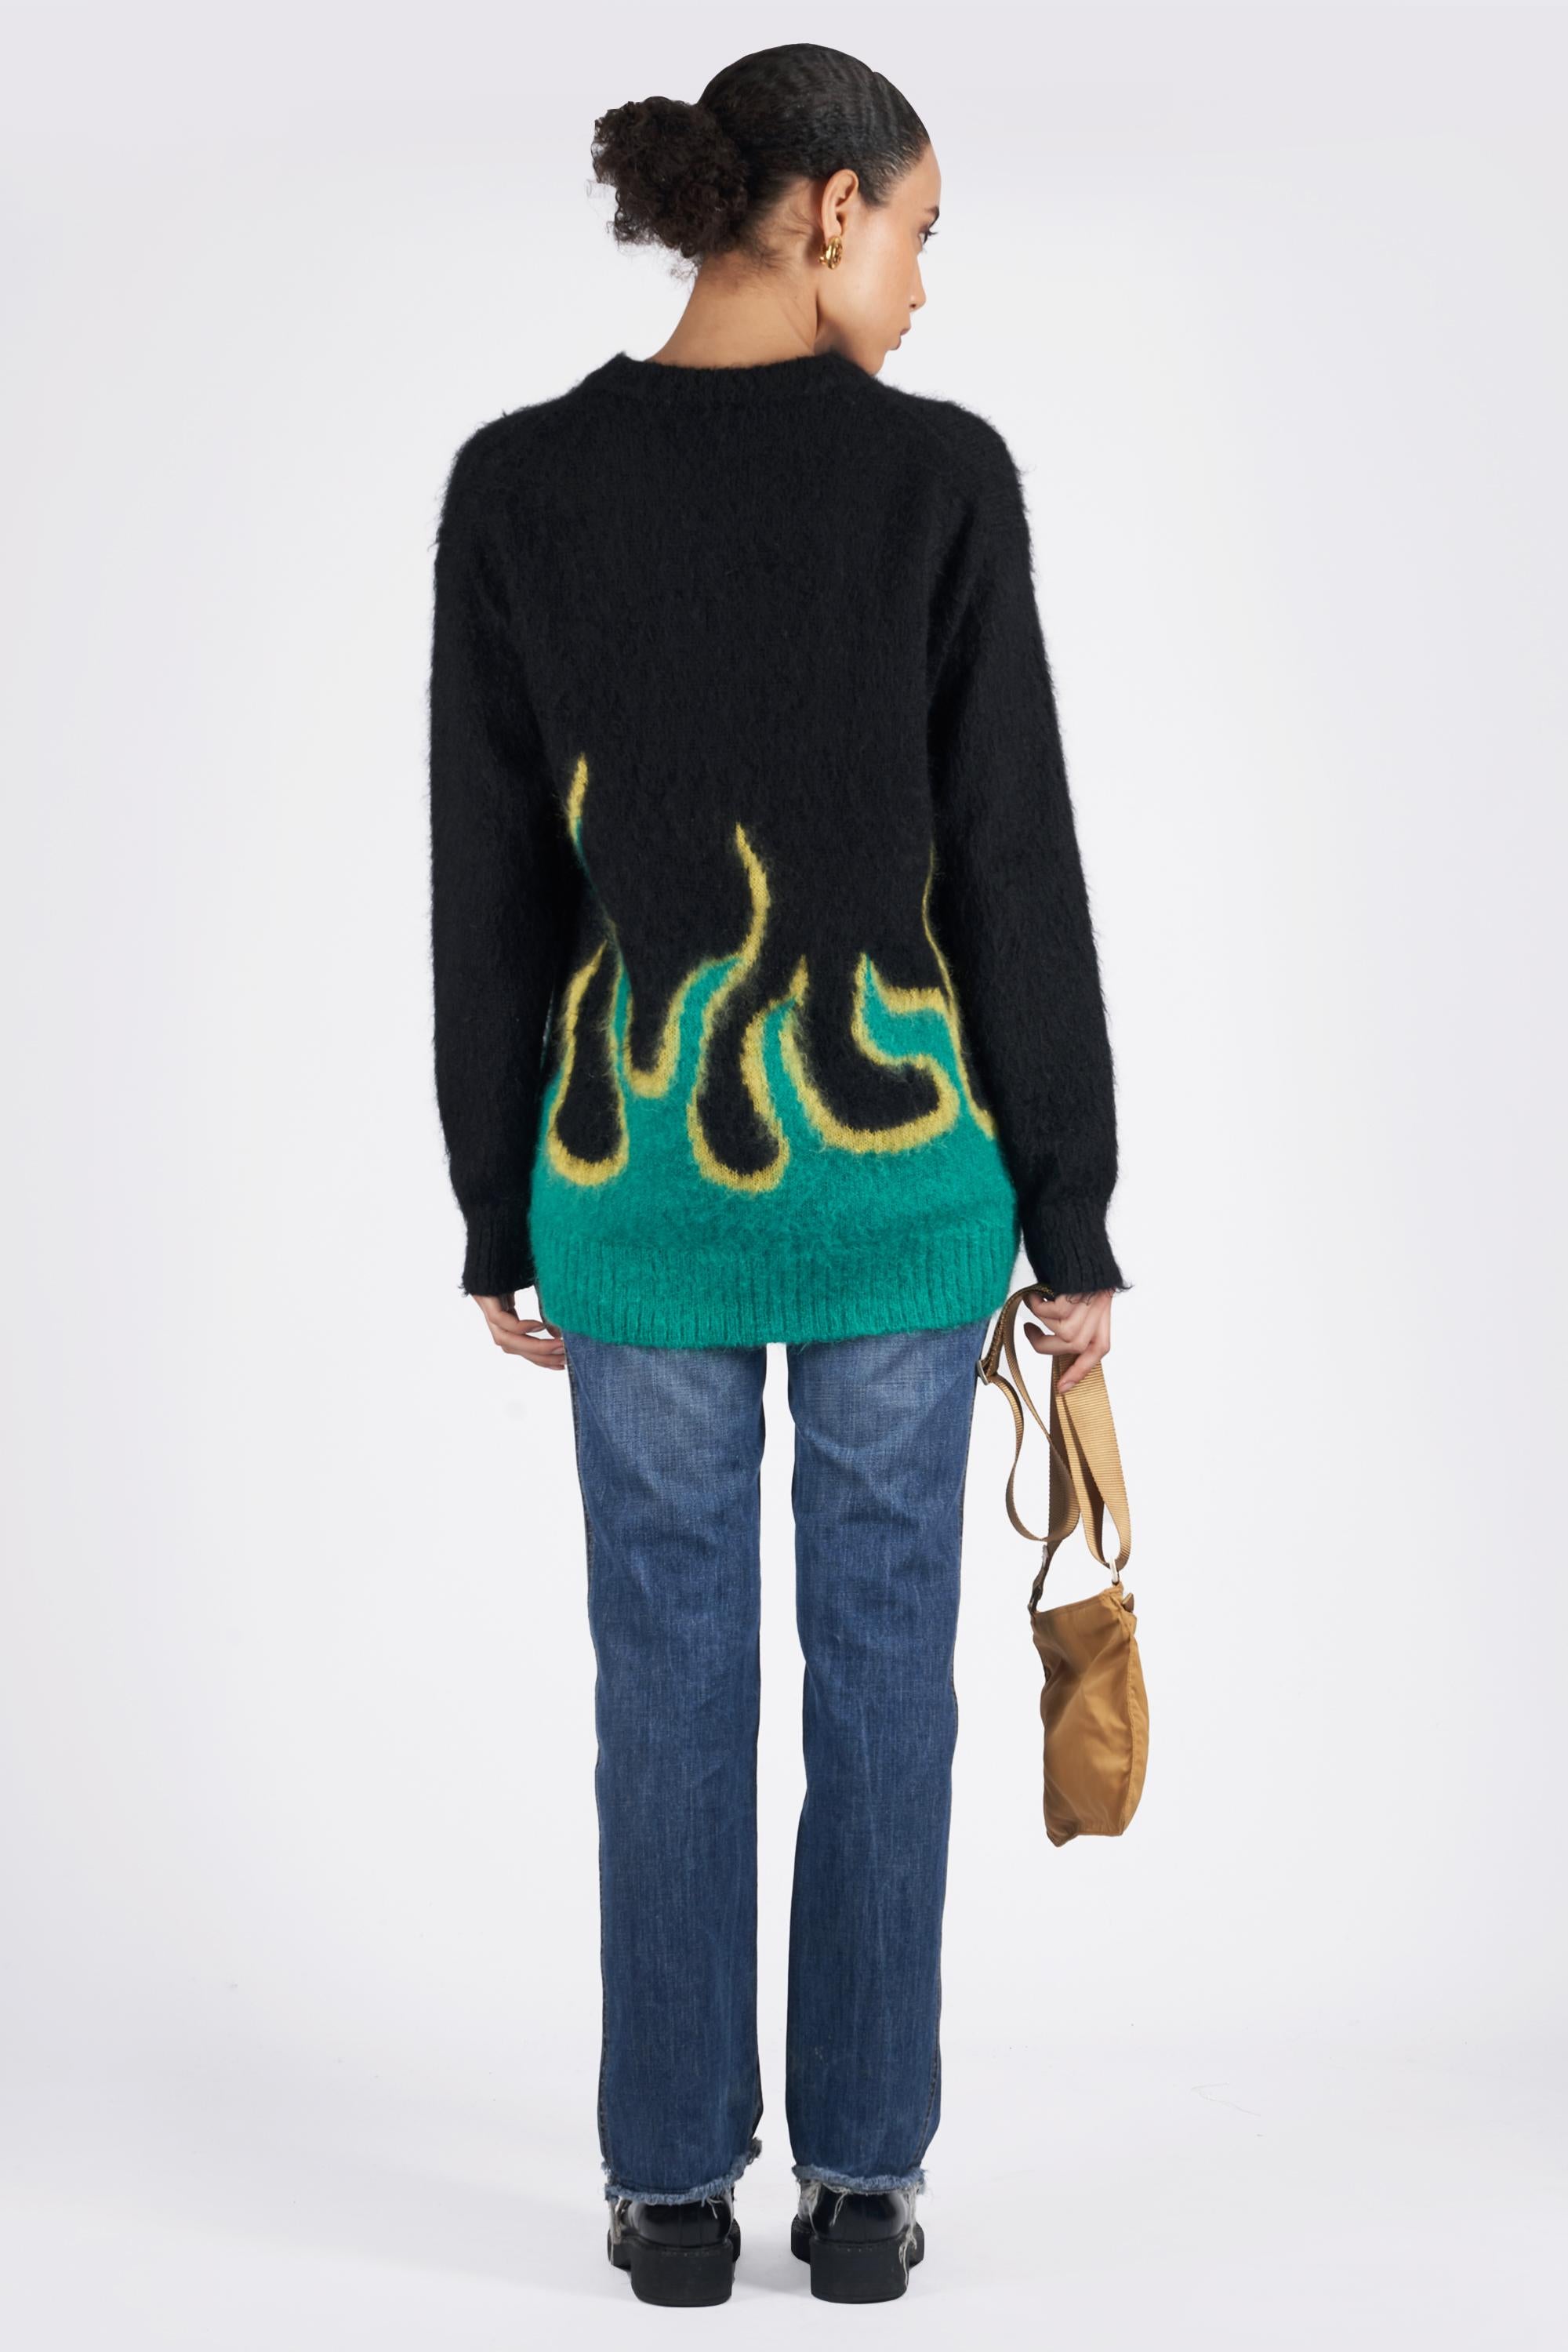 Women's or Men's Prada 2018 Flame Knitted Jumper For Sale